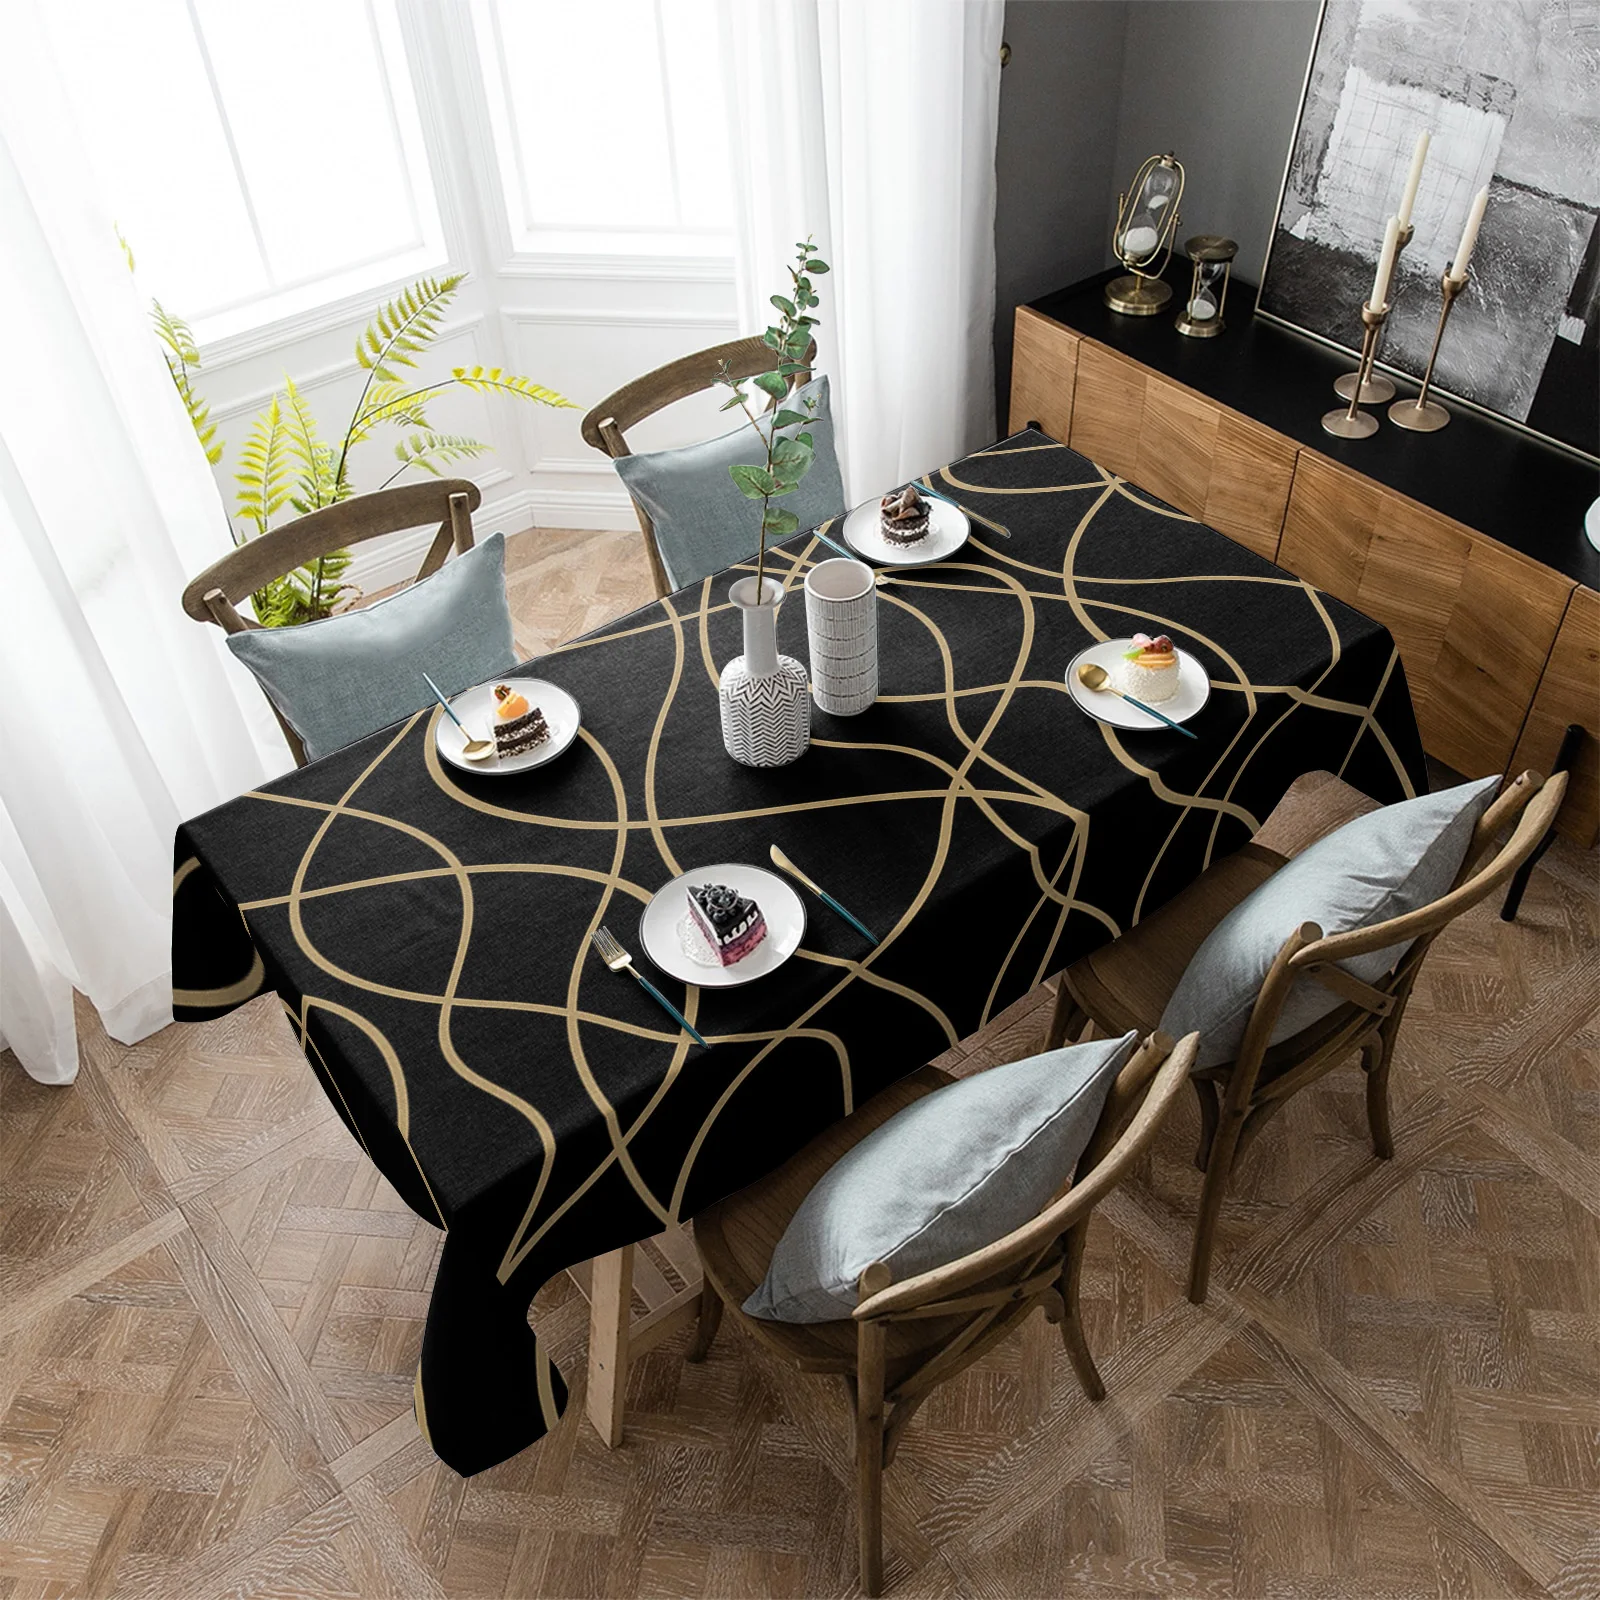 

Twisted Lines Modern Art Black Rectangle Tablecloth Dining Table Decor Waterproof Round Tablecloths Kitchen Home Decoration